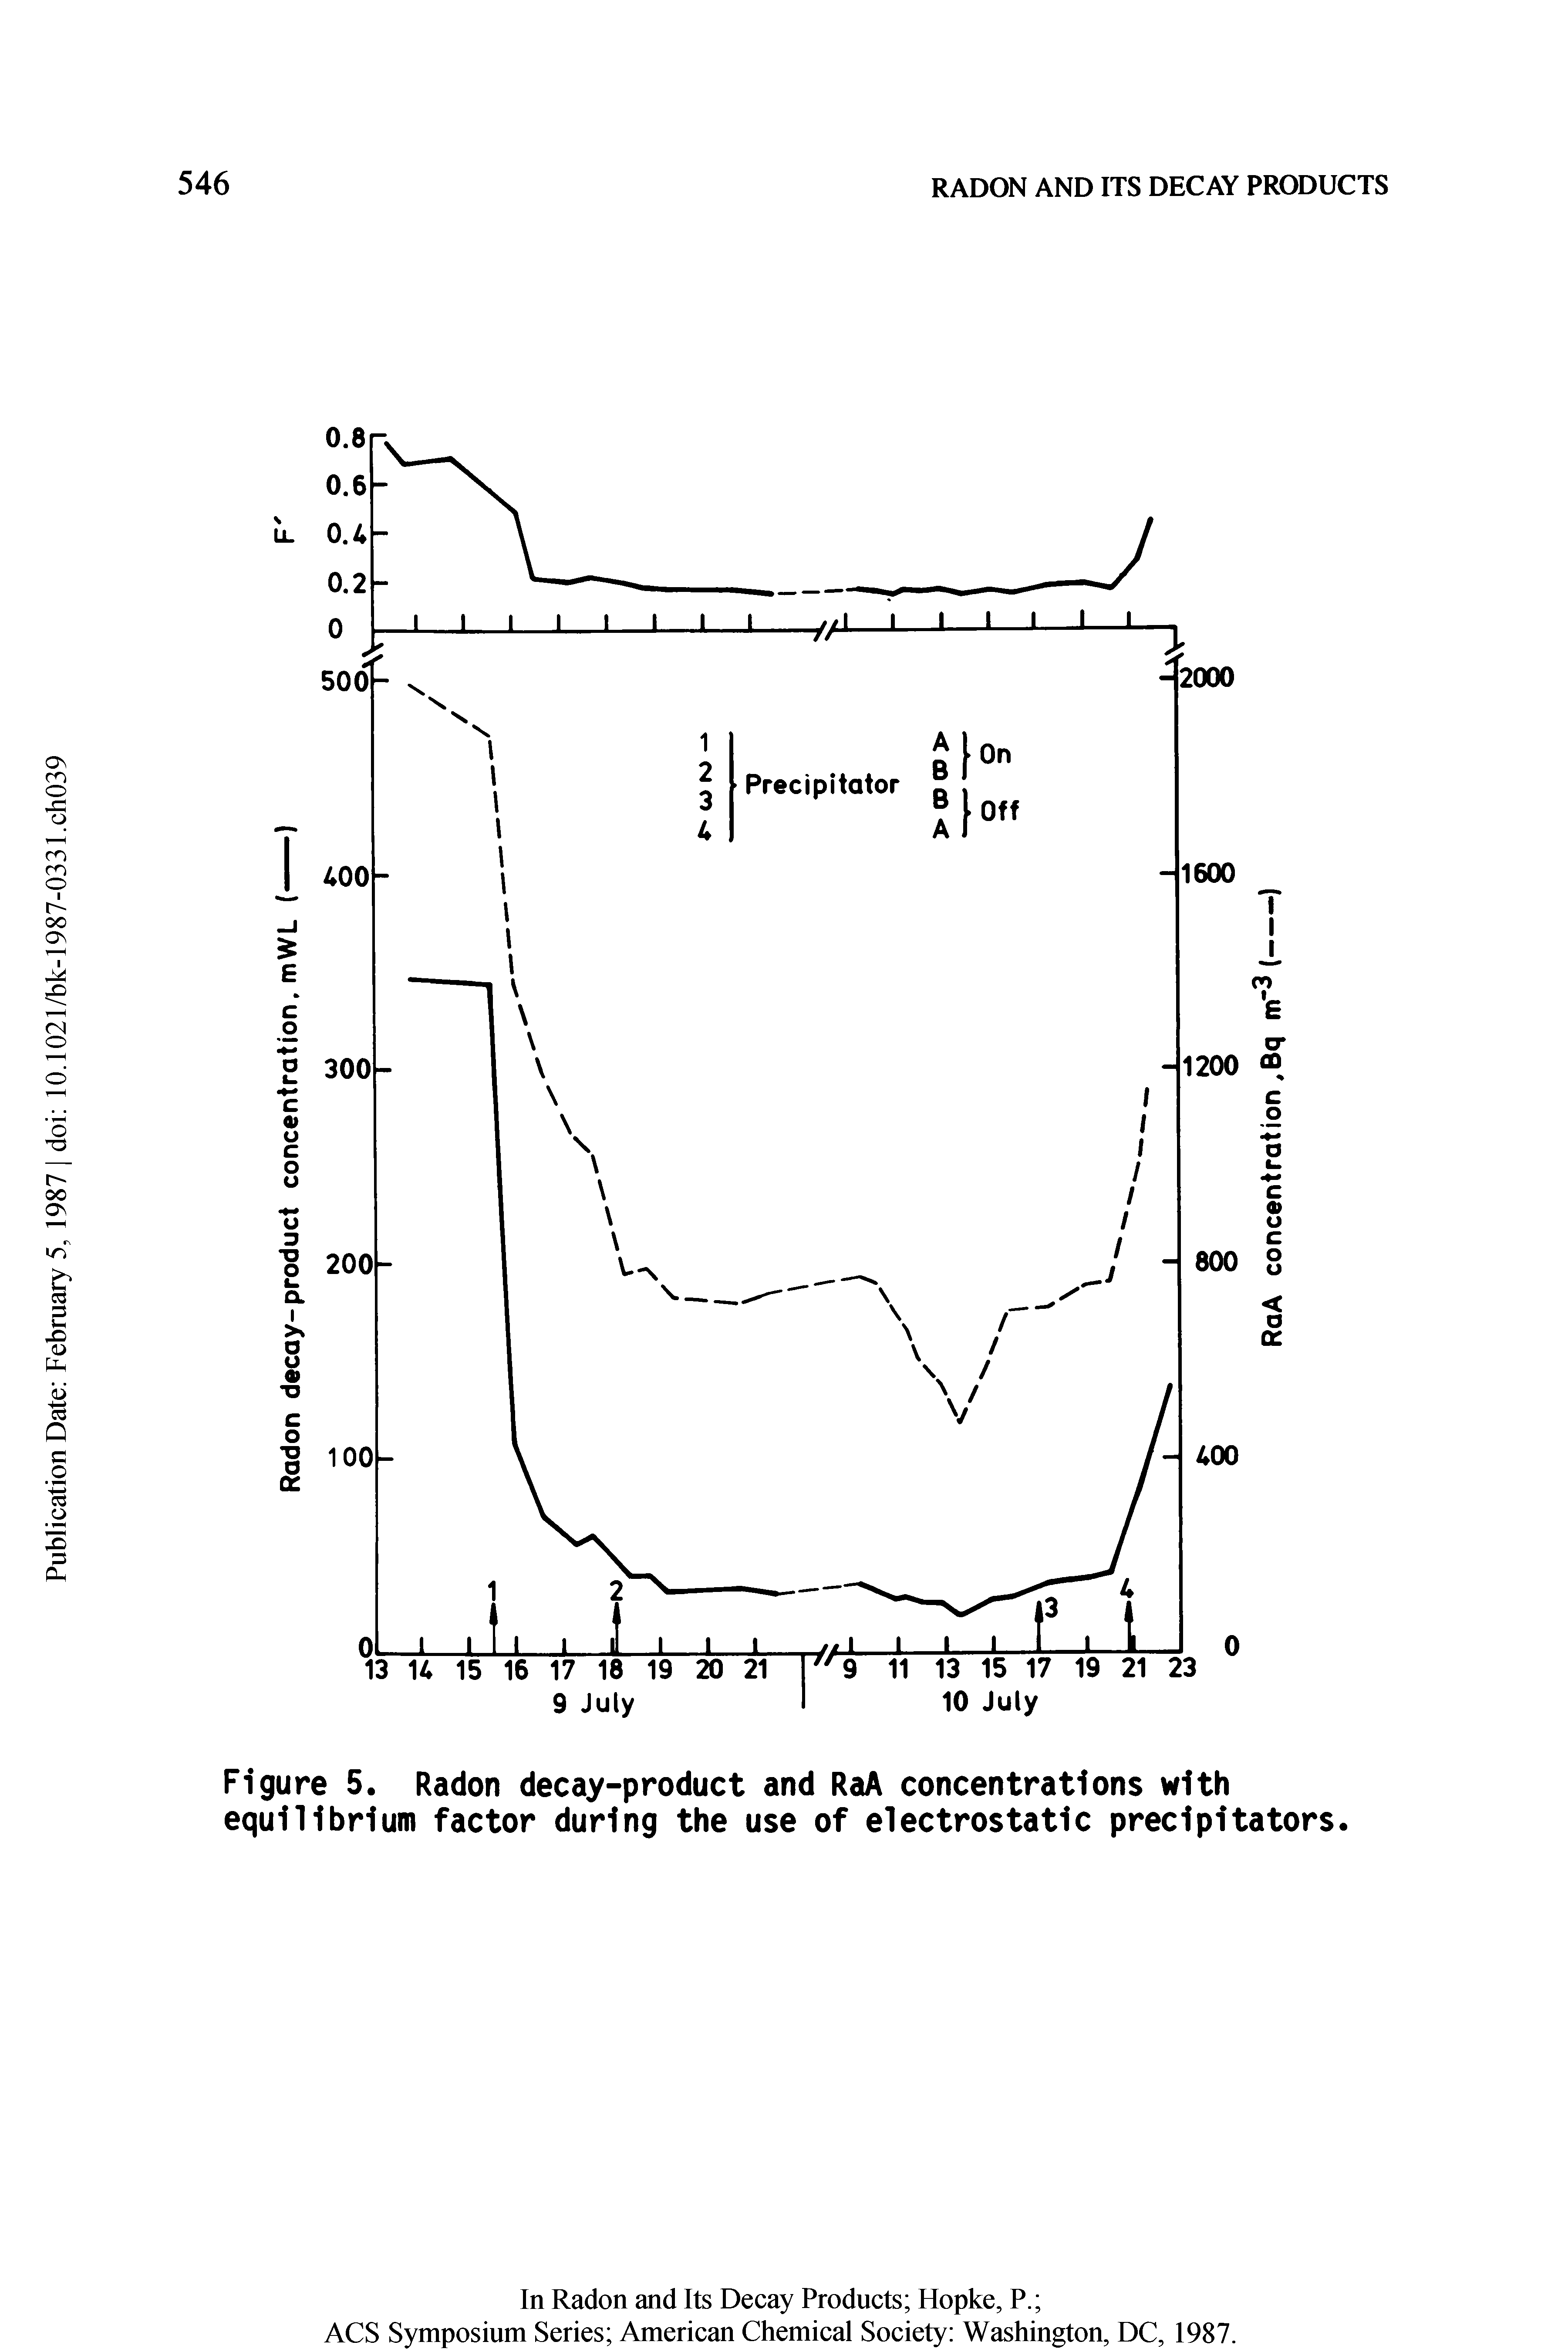 Figure 5. Radon decay-product and RaA concentrations with equilibrium factor during the use of electrostatic precipitators.